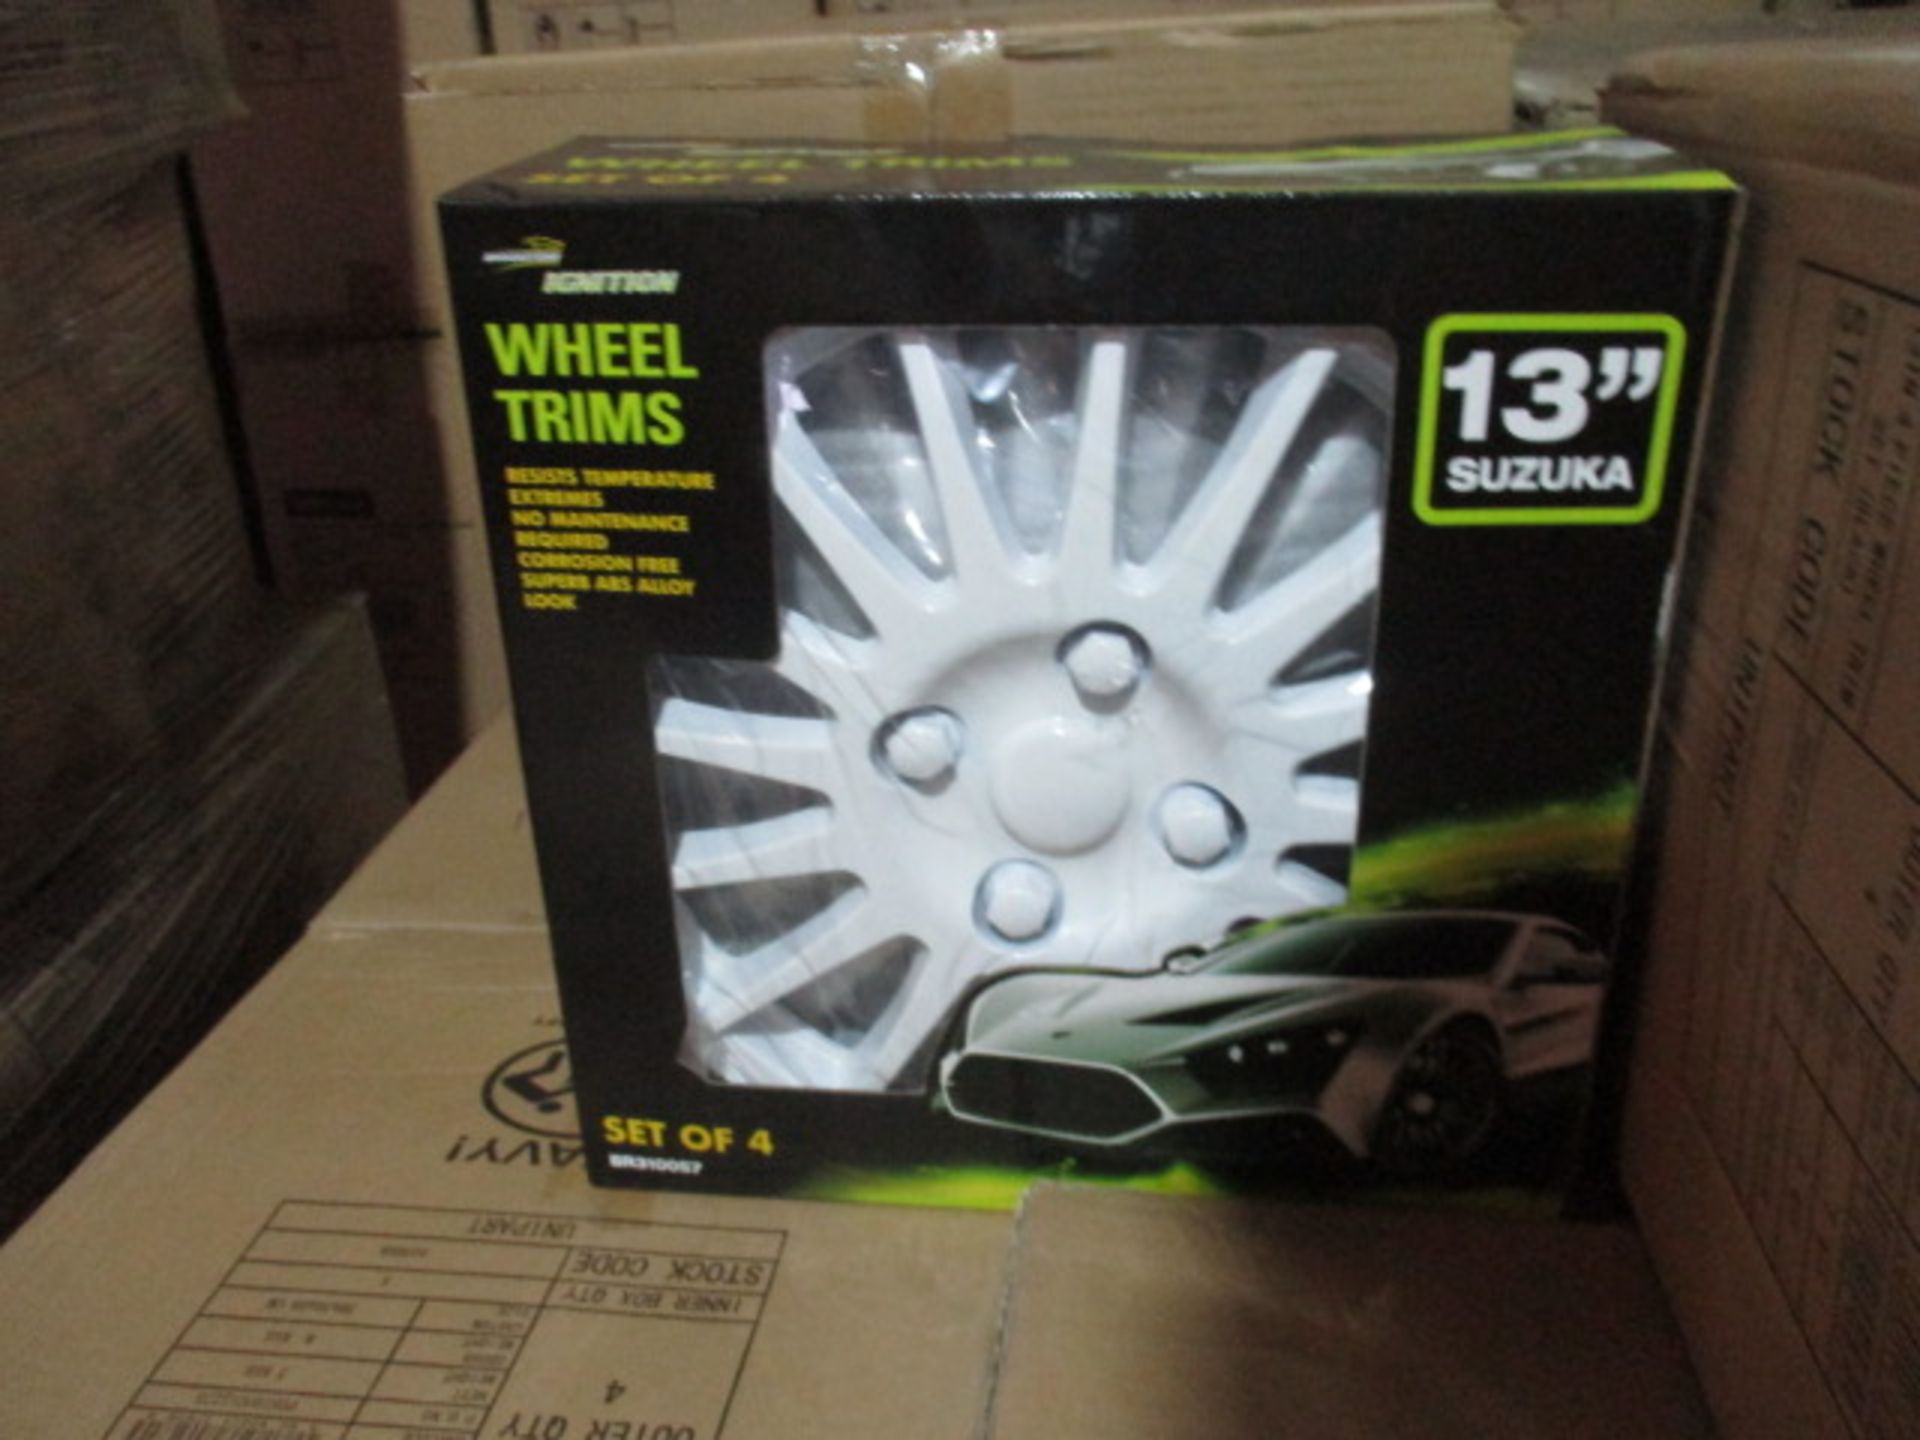 50 x Brookstone Wheel Trims | Black or White | Assorted Designs and Sizes A13" & 14"